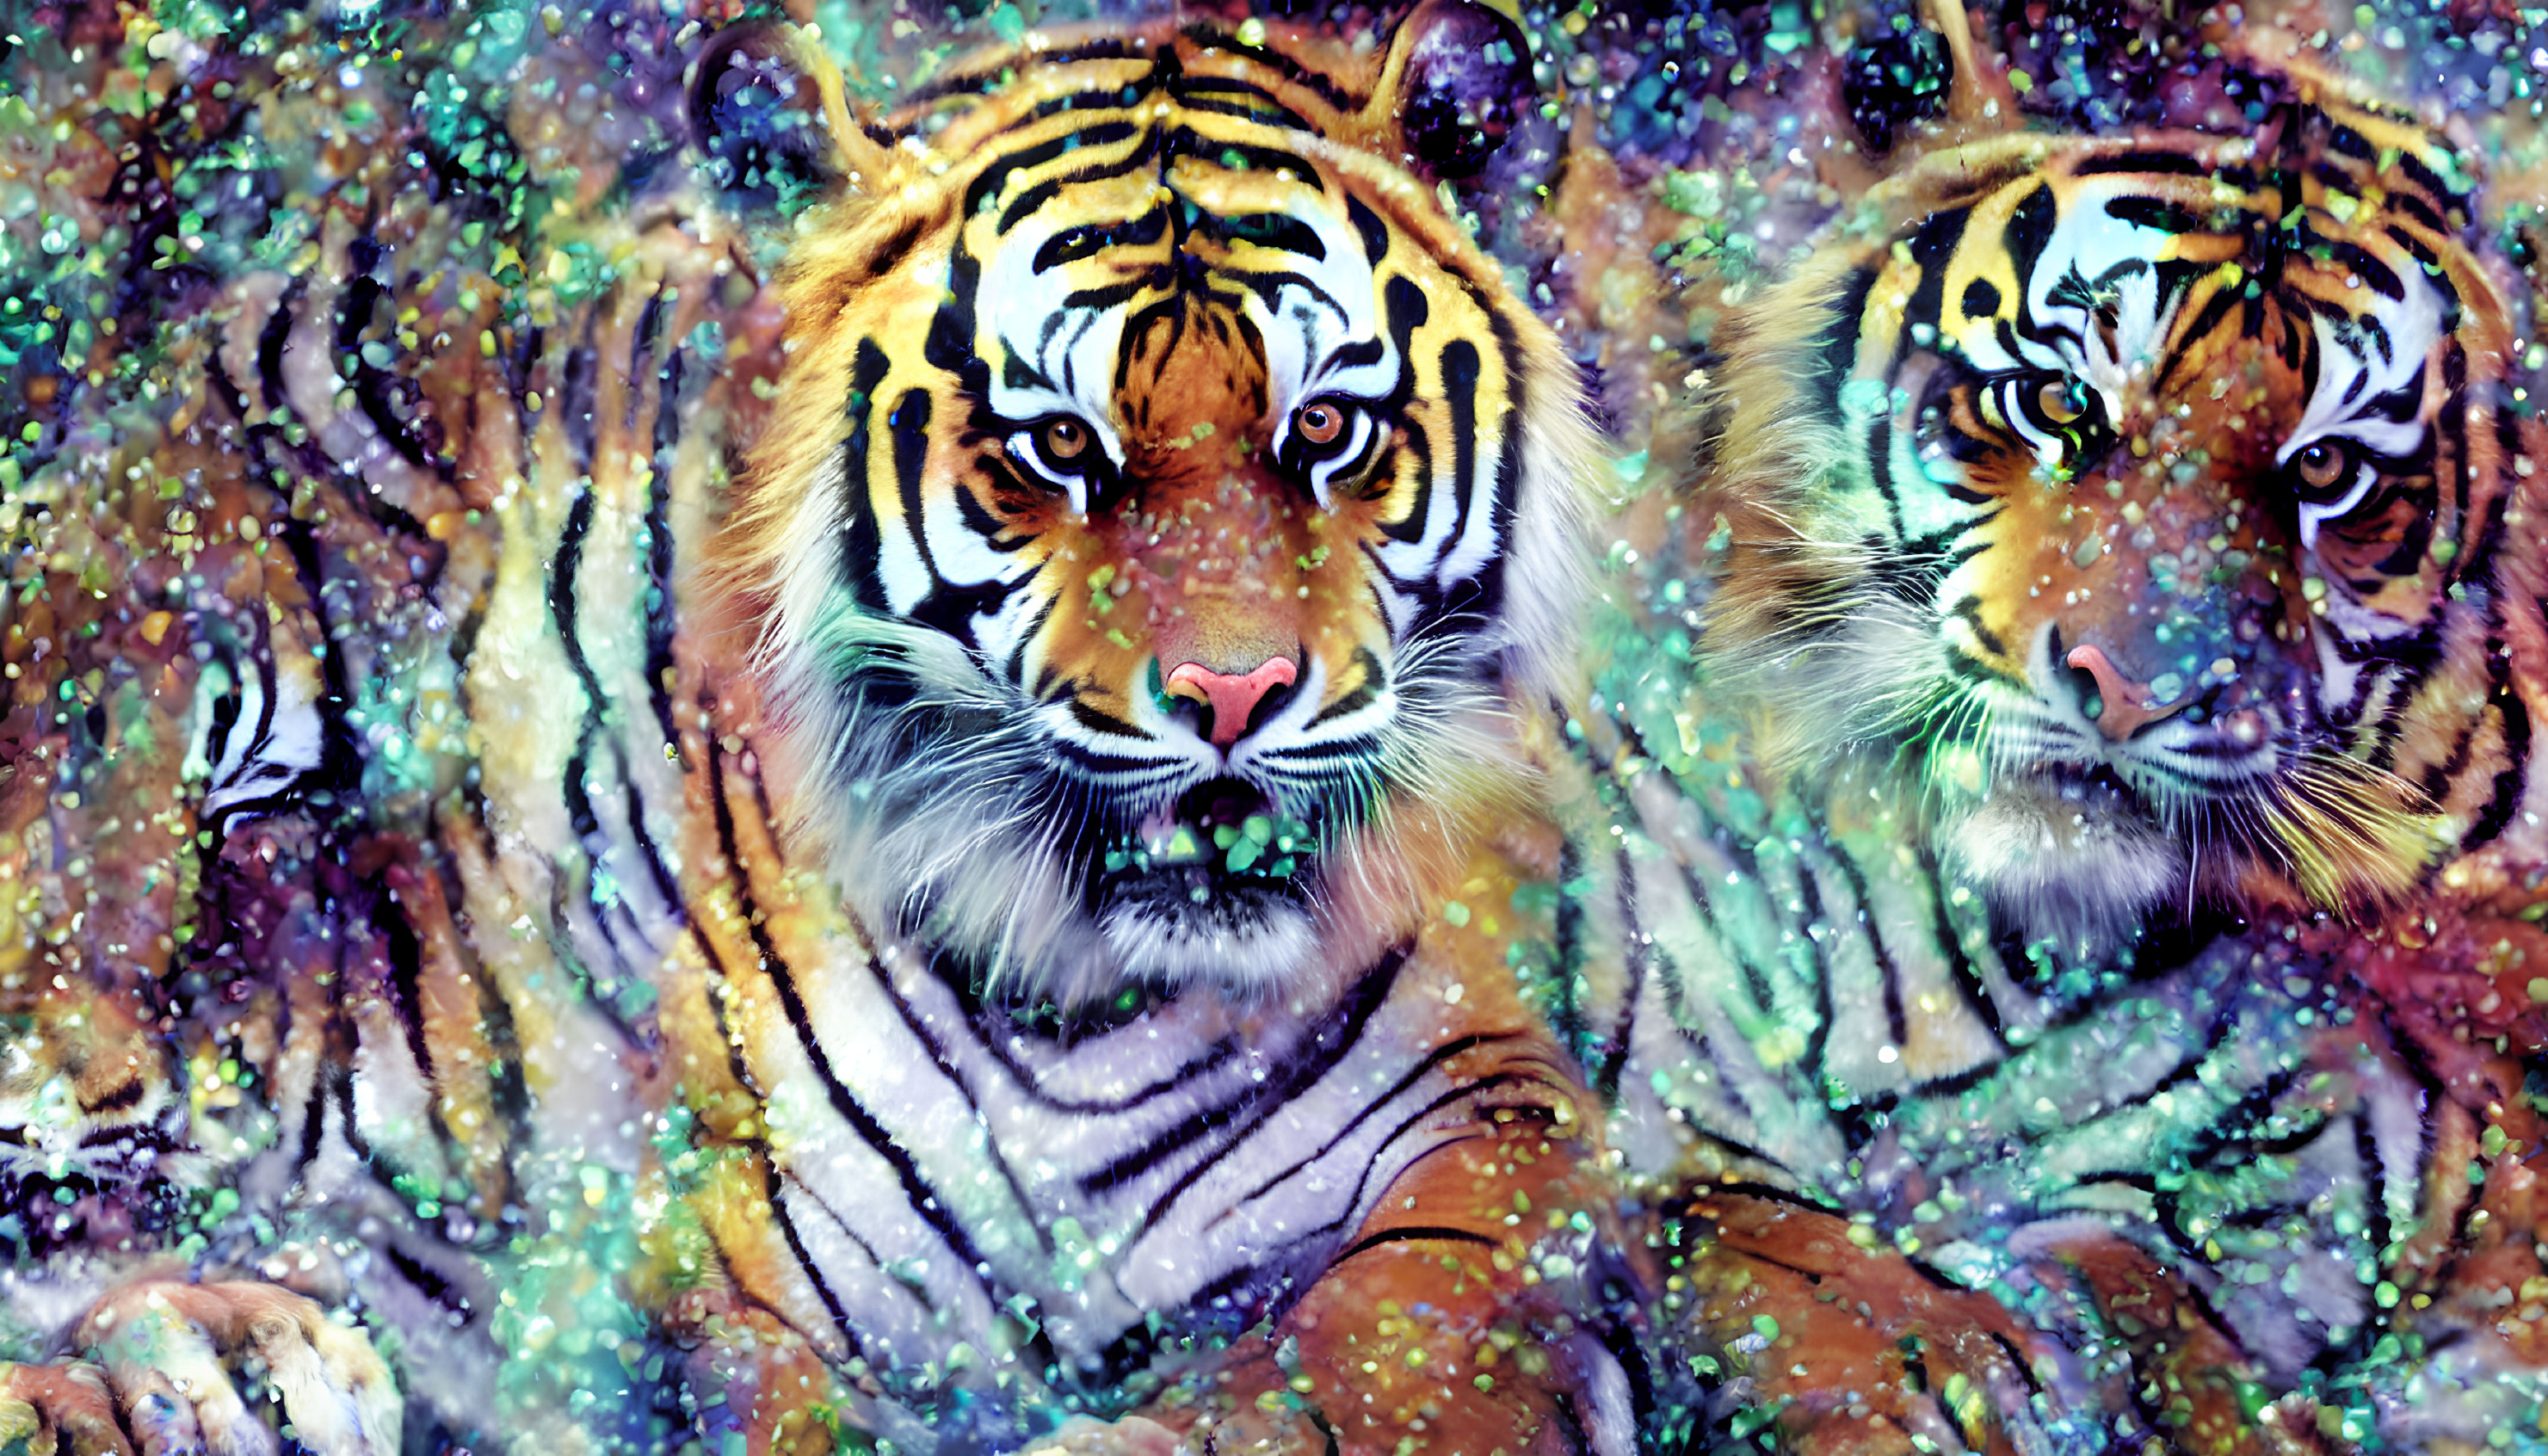 Cosmic-inspired digital art of two tigers in nebula background